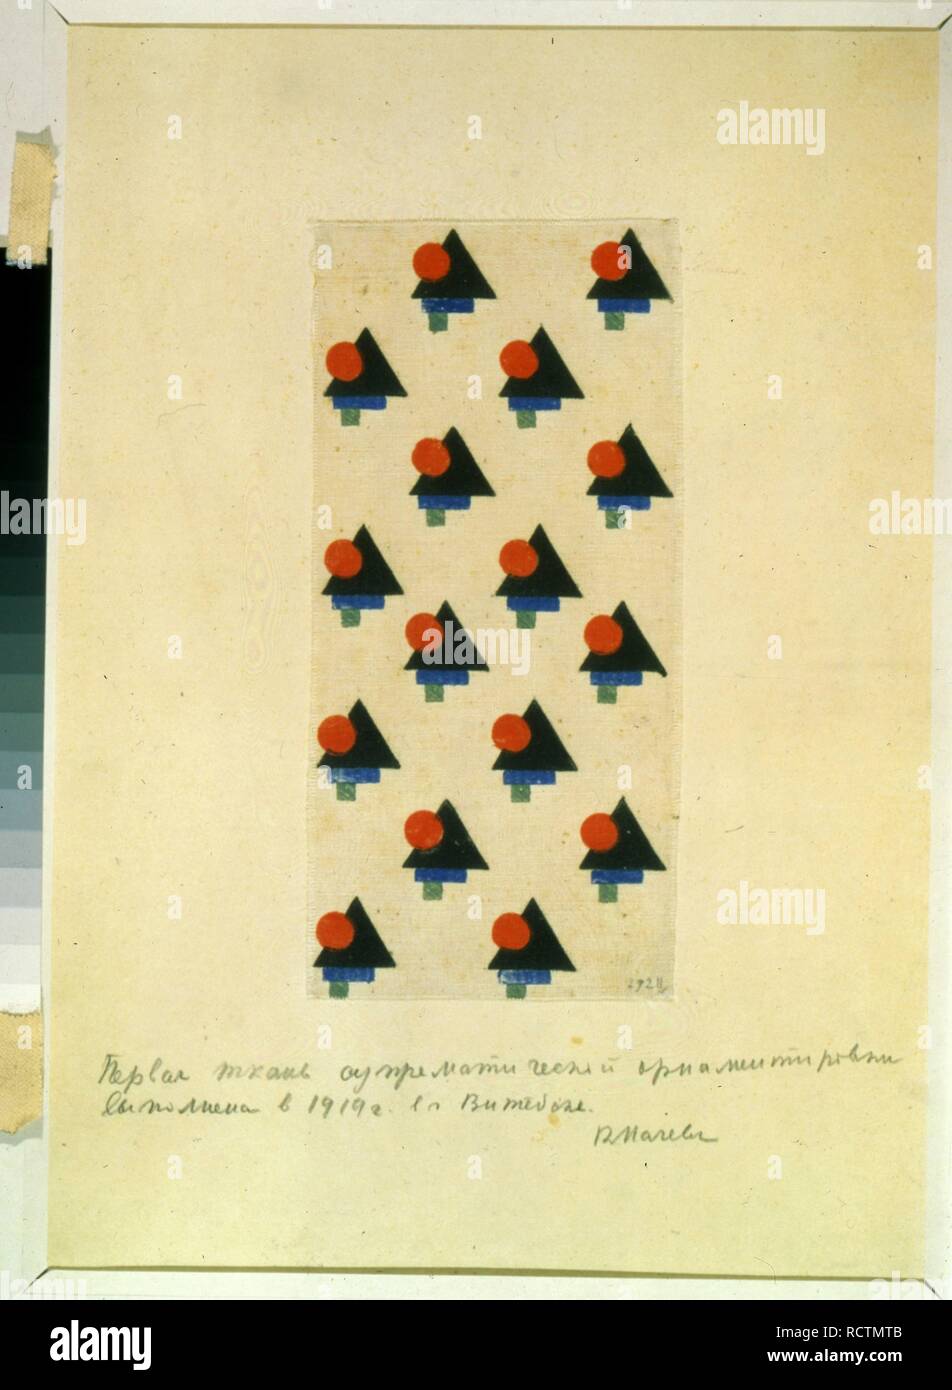 First material with the suprematism design. Museum: State Russian ...